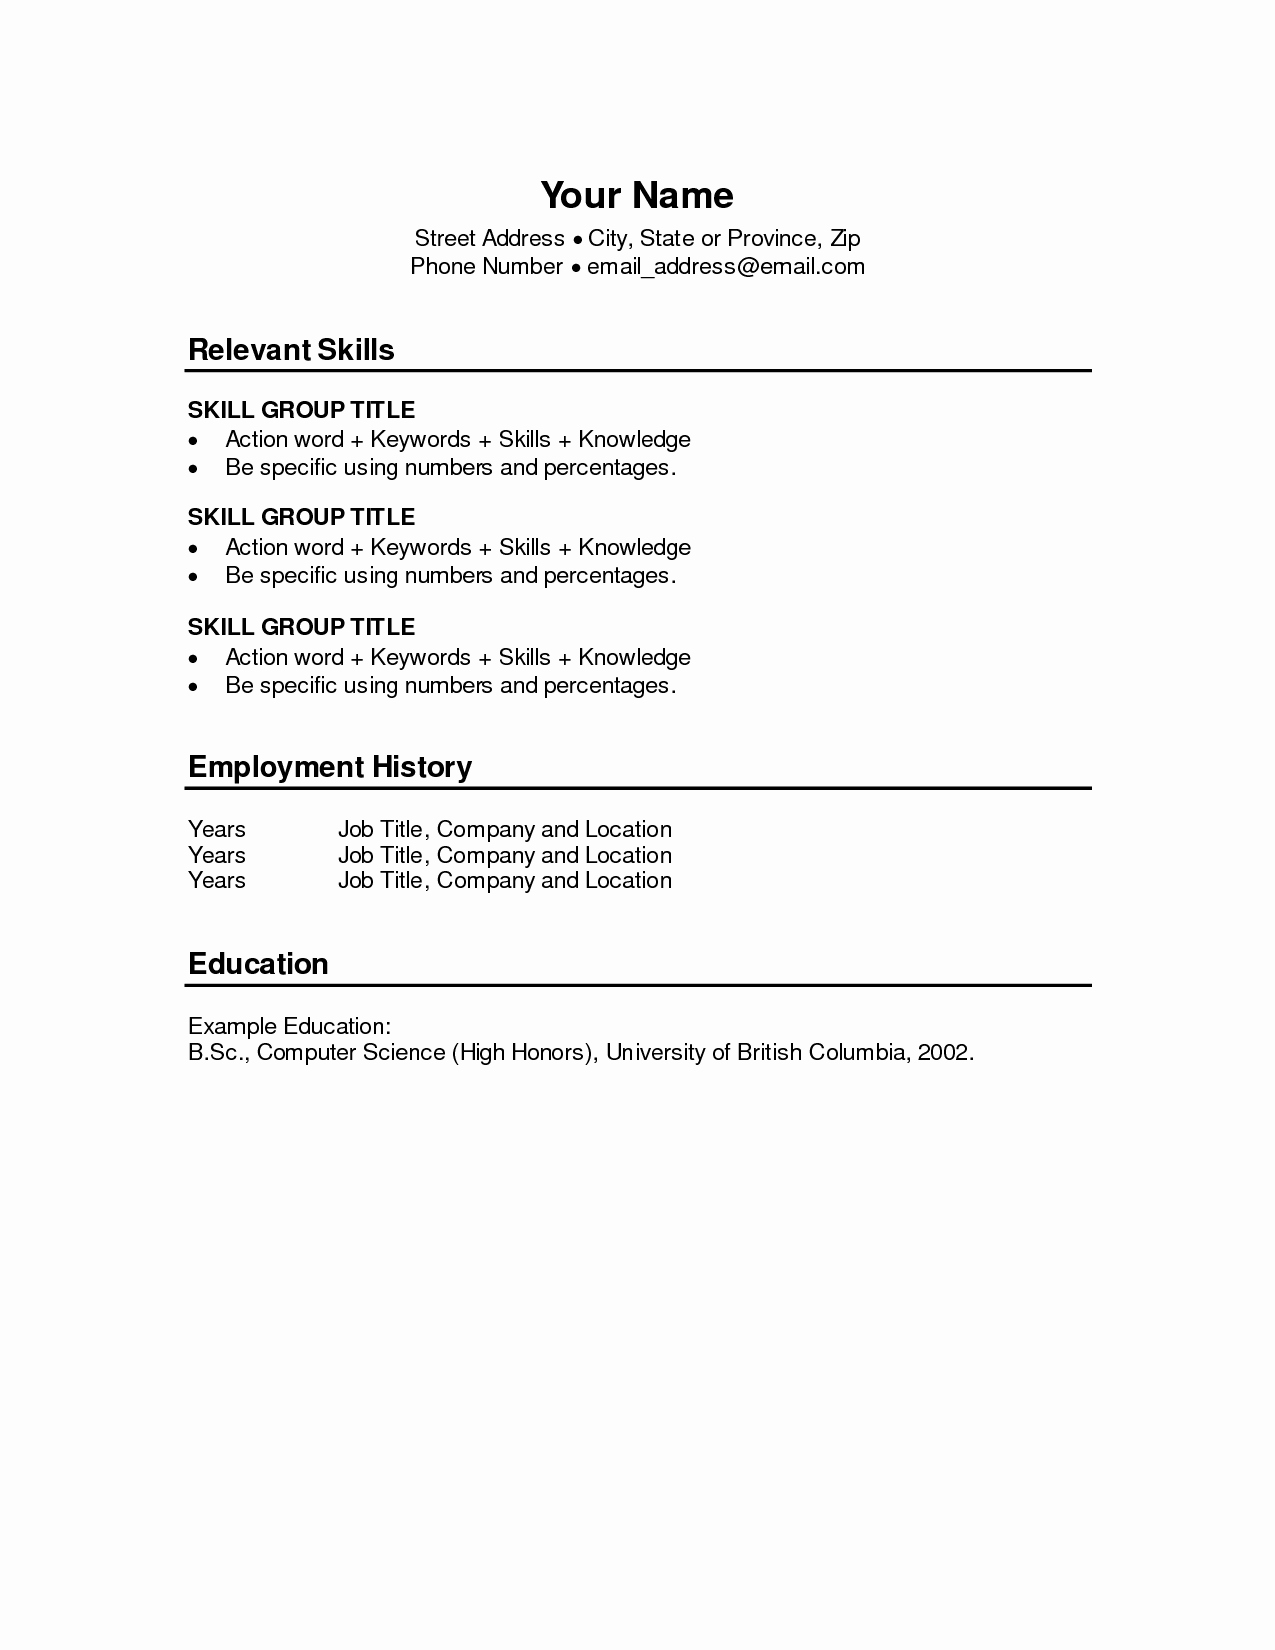 Resume Reference Template Microsoft Word Fresh Resume References Template Mentallyright